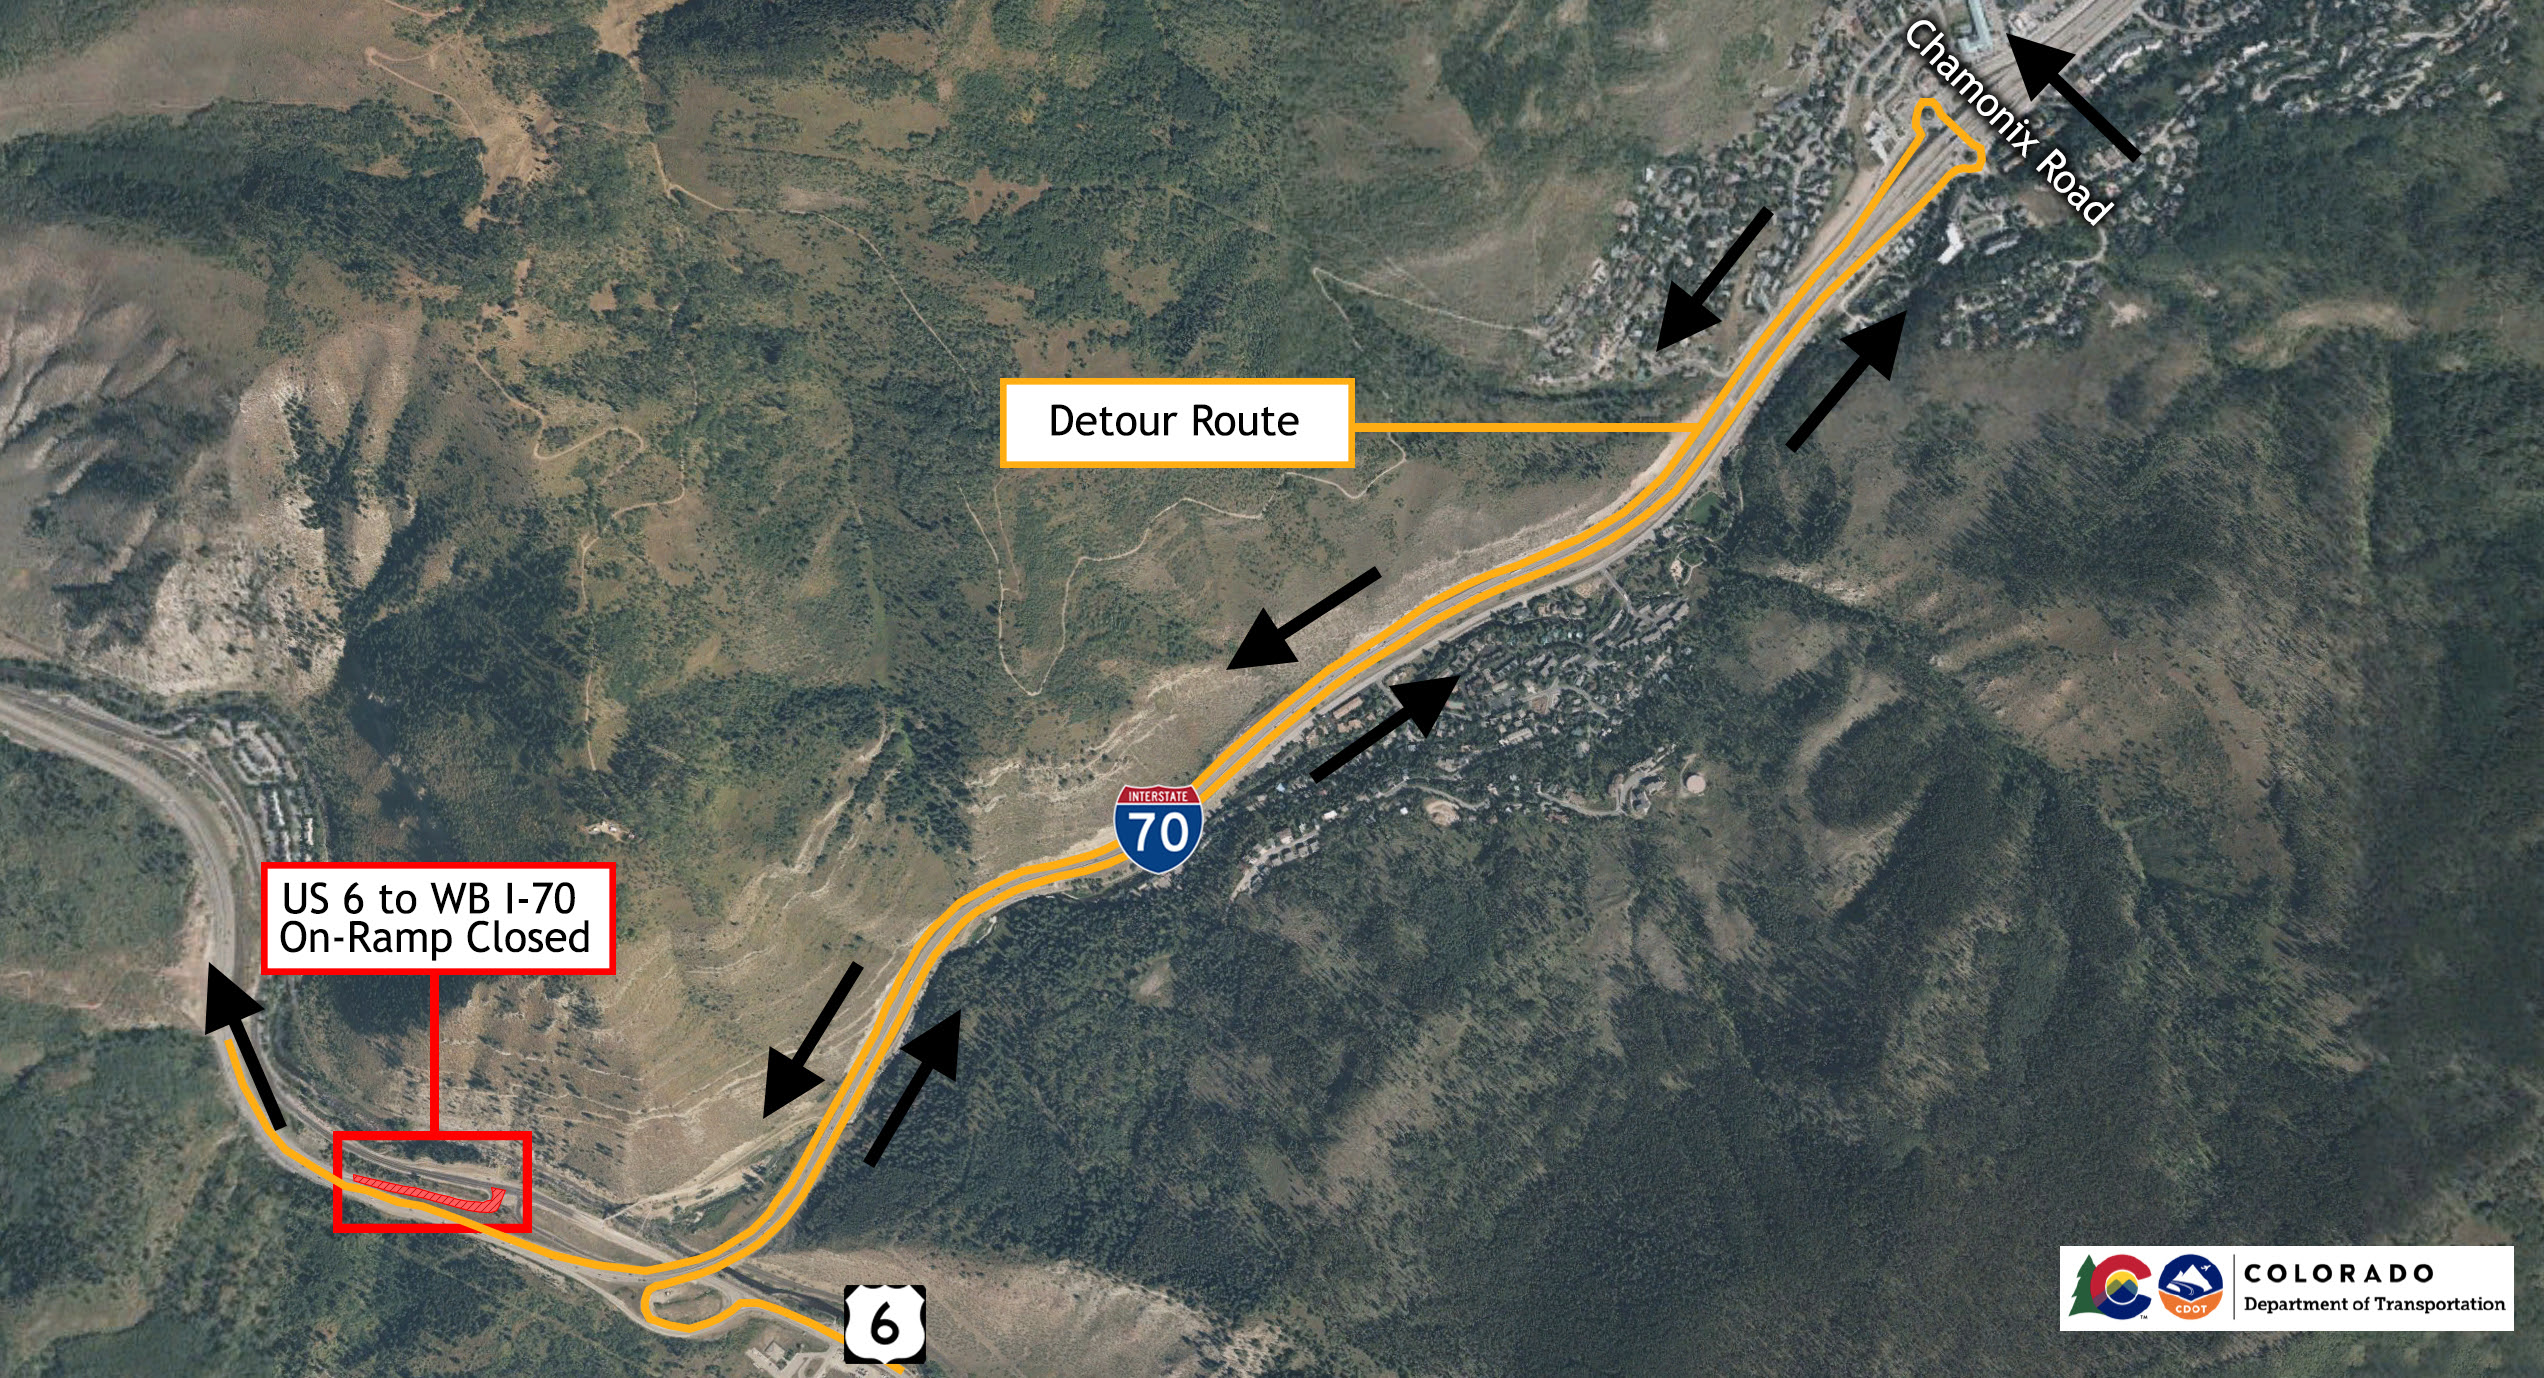 Detour map for the I-70 Eagle Essential Wall Repair project.jpg detail image